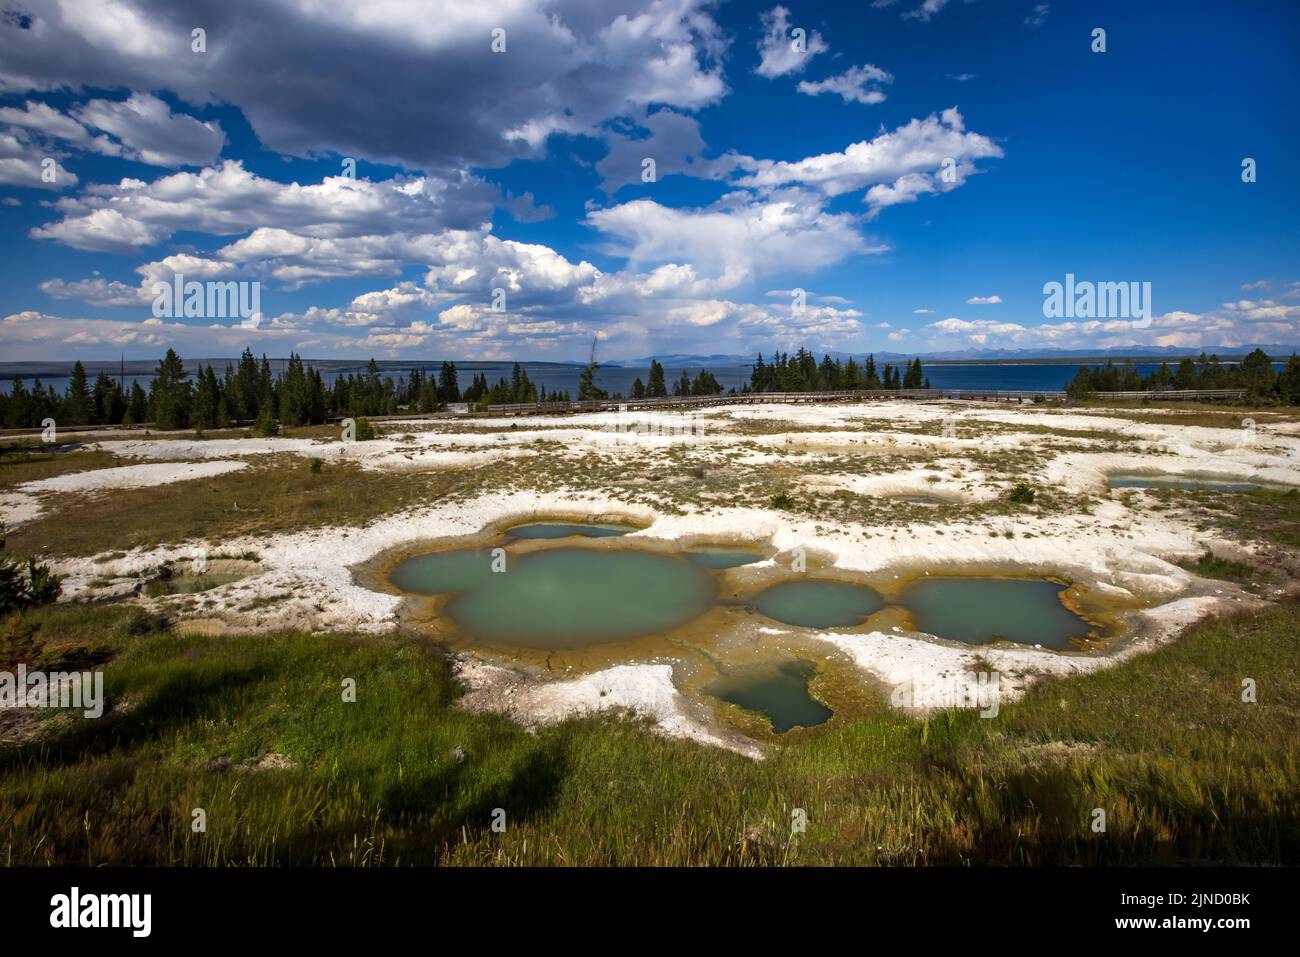 West Thumb Geyser Basin in Yellowstone National Park, Teton County, Wyoming, USA. Mimulus Pools in the foreground and Yellowstone Lake in the distance. Stock Photo